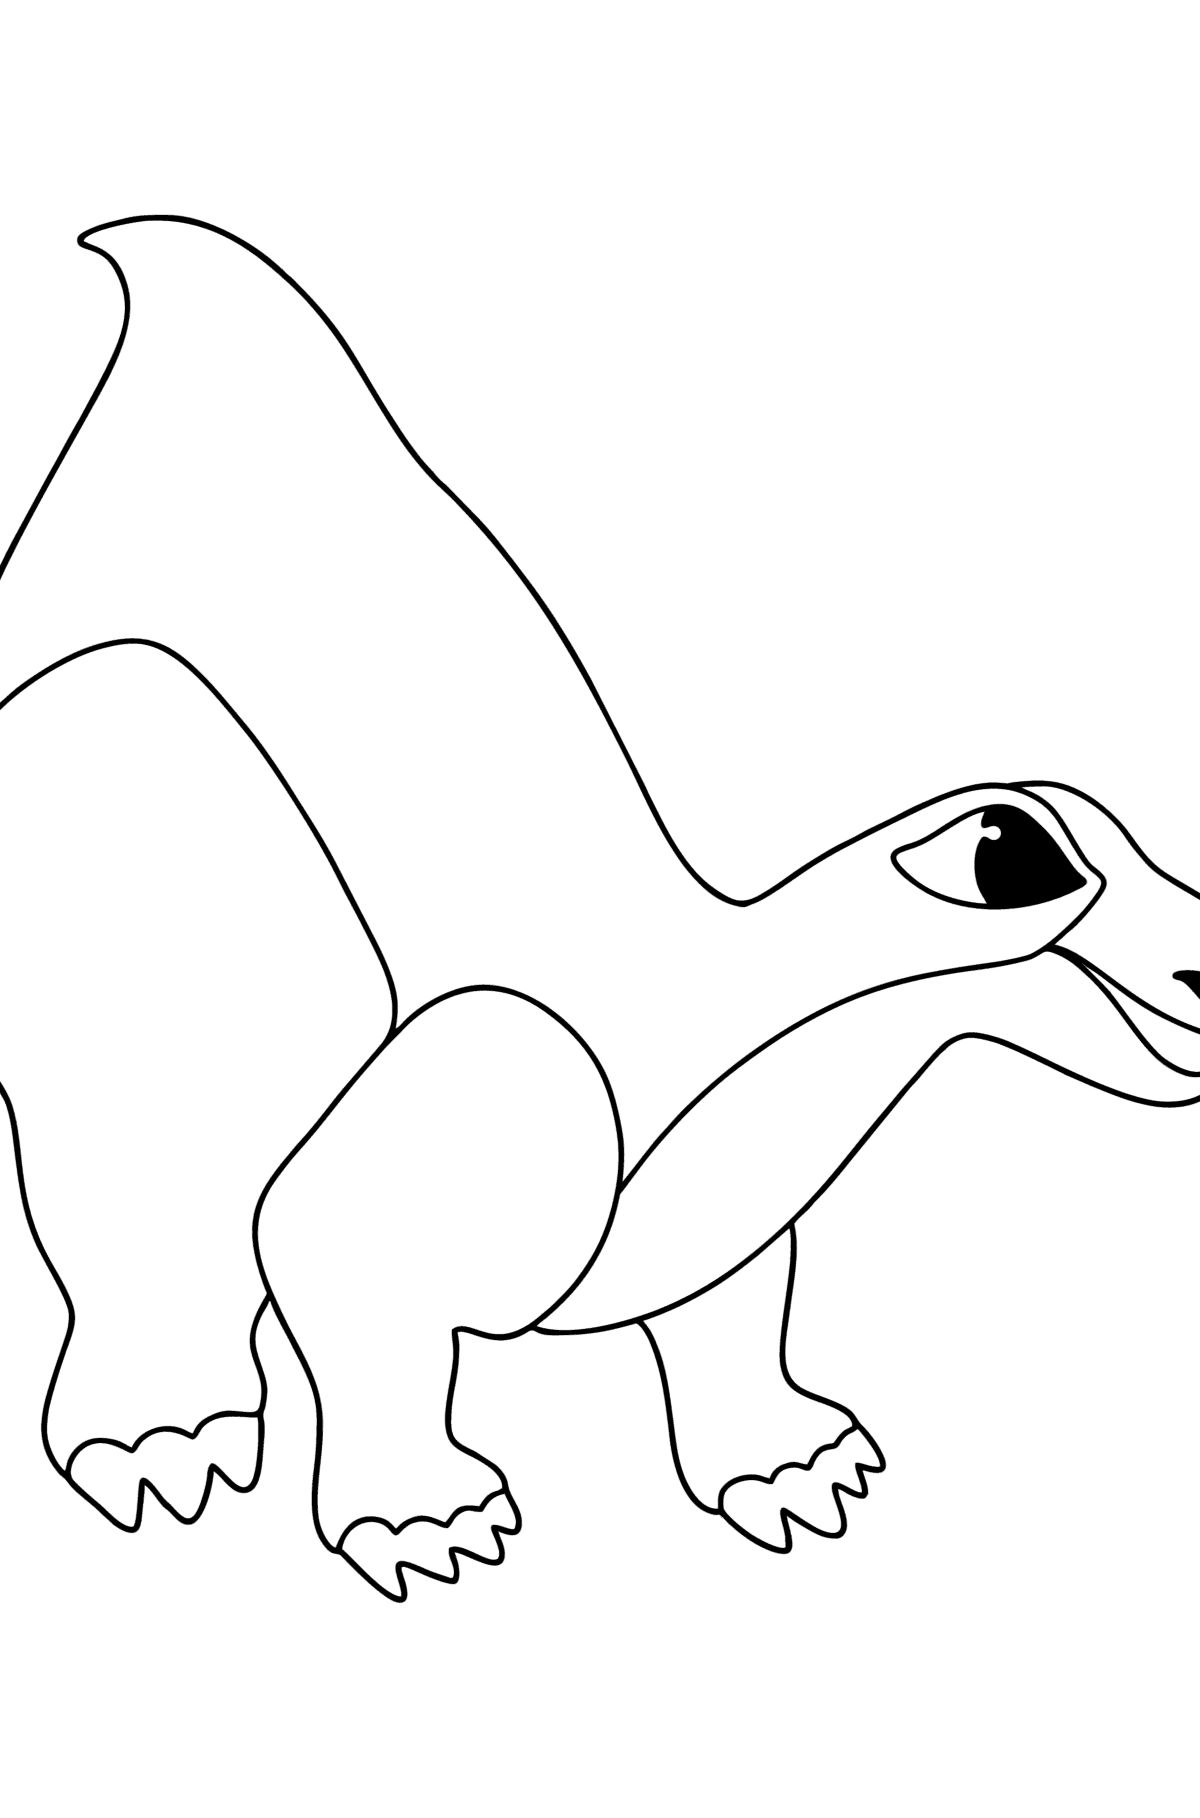 Camptosaurus coloring page - Coloring Pages for Kids